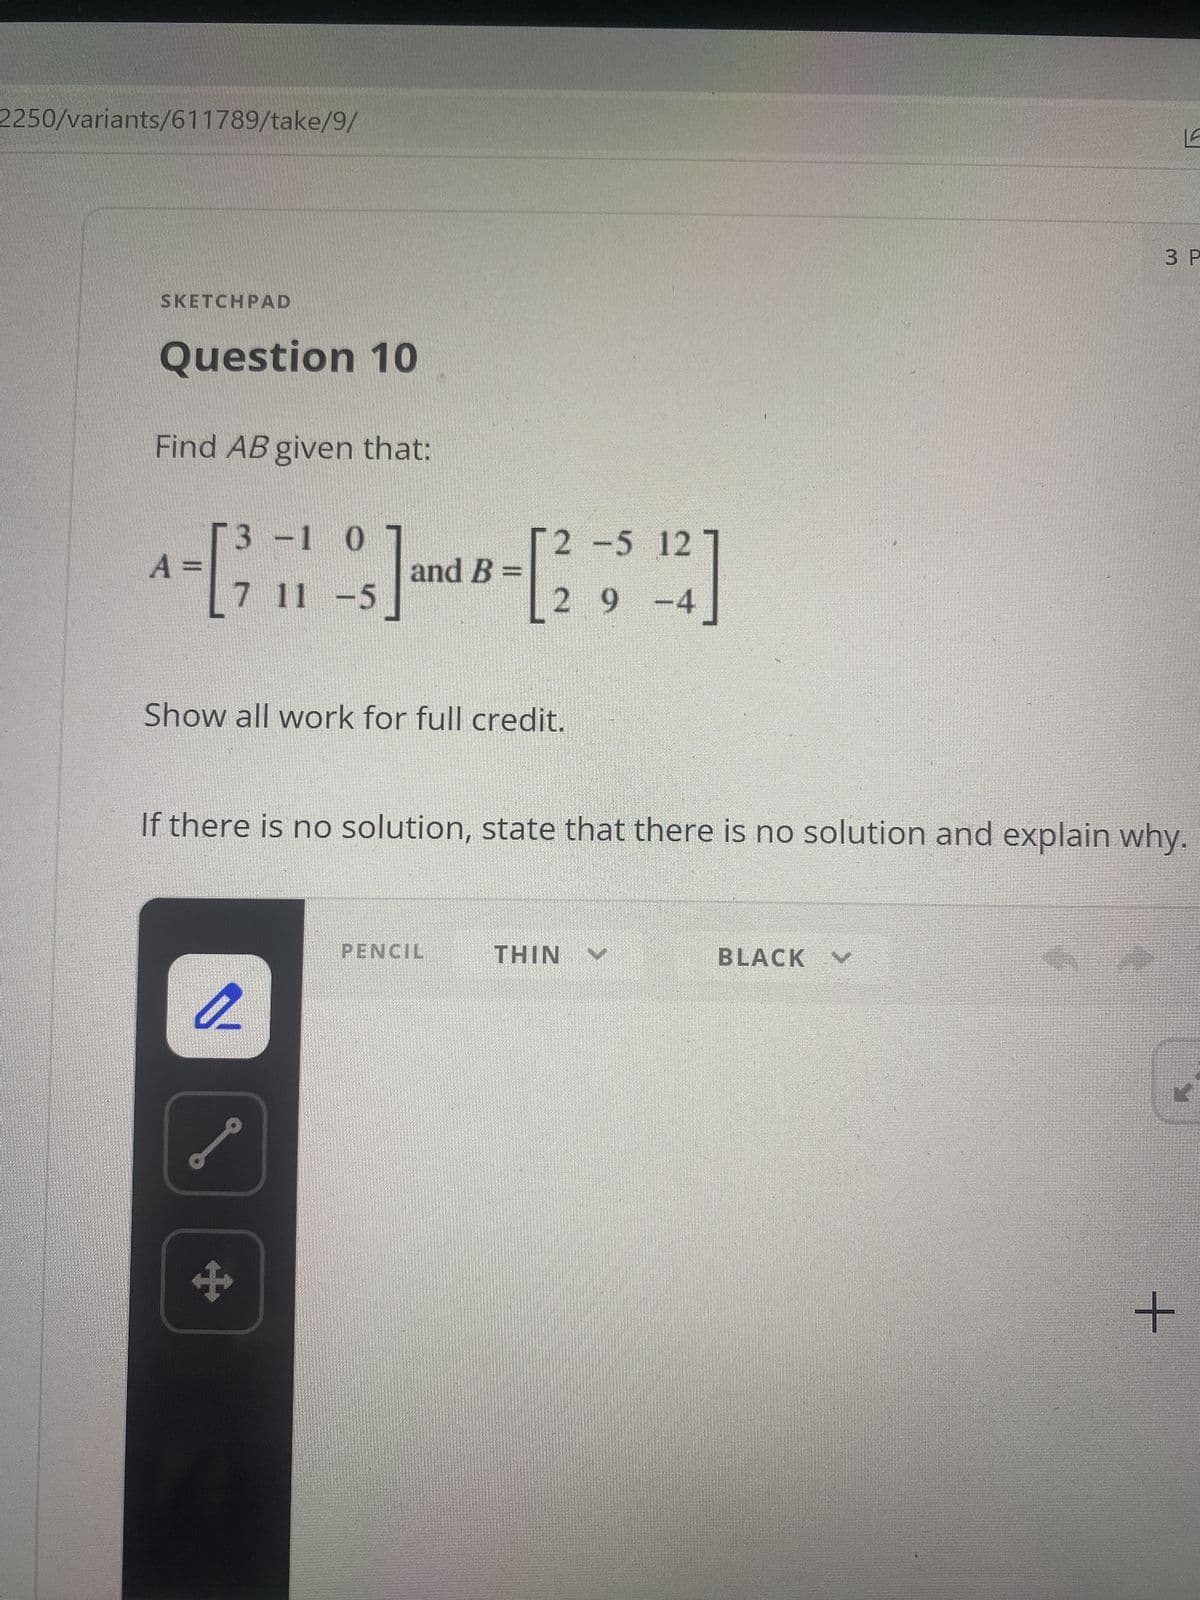 2250/variants/611789/take/9/
3 P
SKETCHPAD
Question 10
Find AB given that:
3-1 0
[2 -5 12
and B=
7 11 -5
2 9-4
Show all work for full credit.
If there is no solution, state that there is no solution and explain why.
PENCIL
BLACK
NIHI
